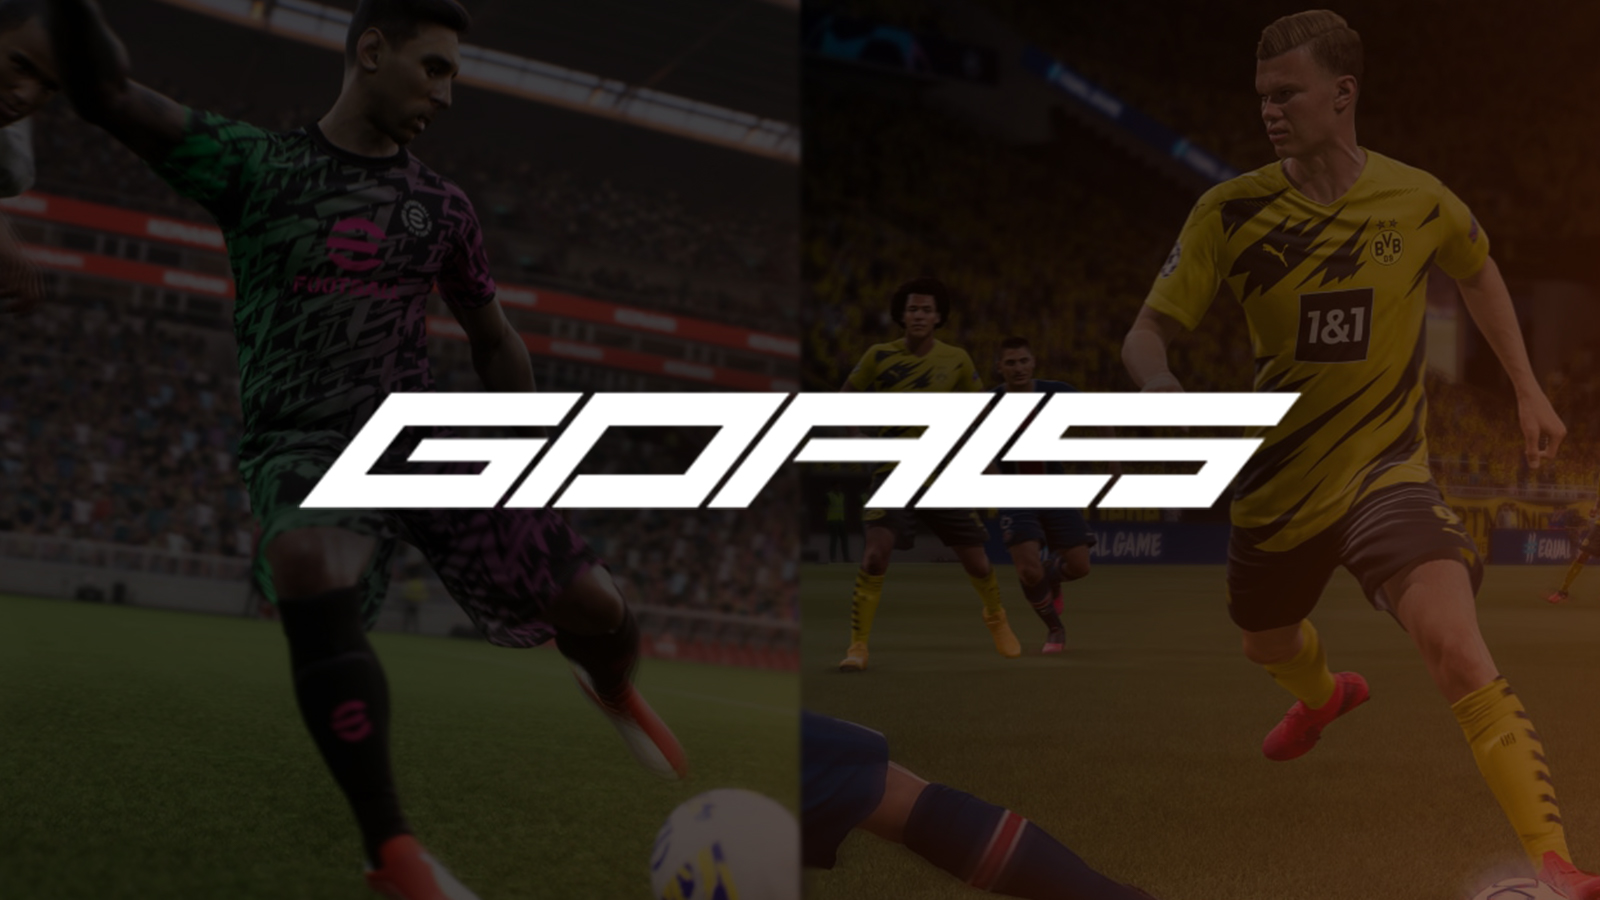 GOALS Football Game: Everything You Need to Know